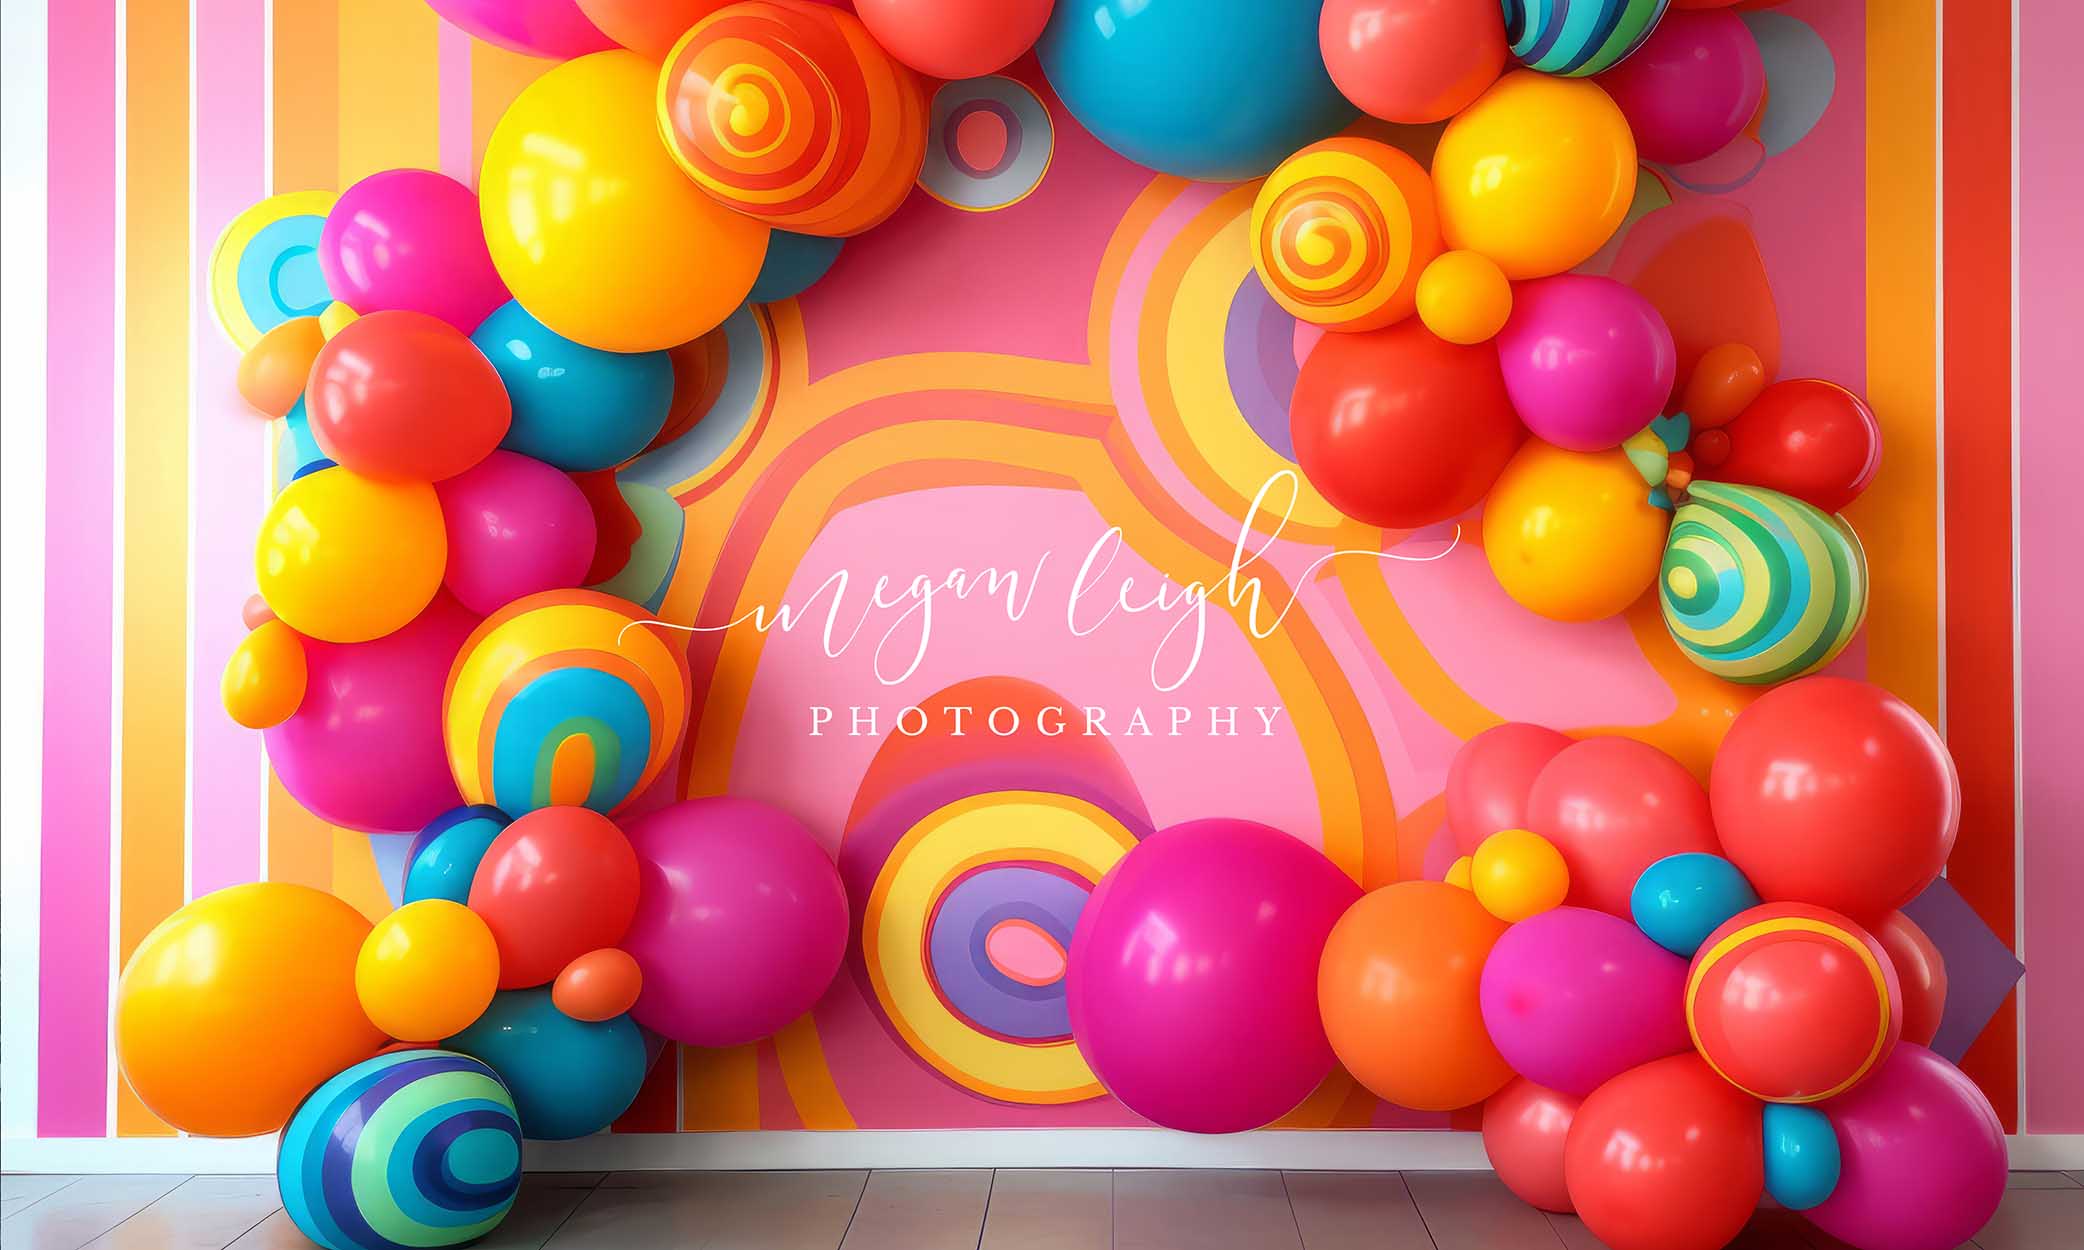 Kate Groovy Wall Backdrop Designed by Megan Leigh Photography